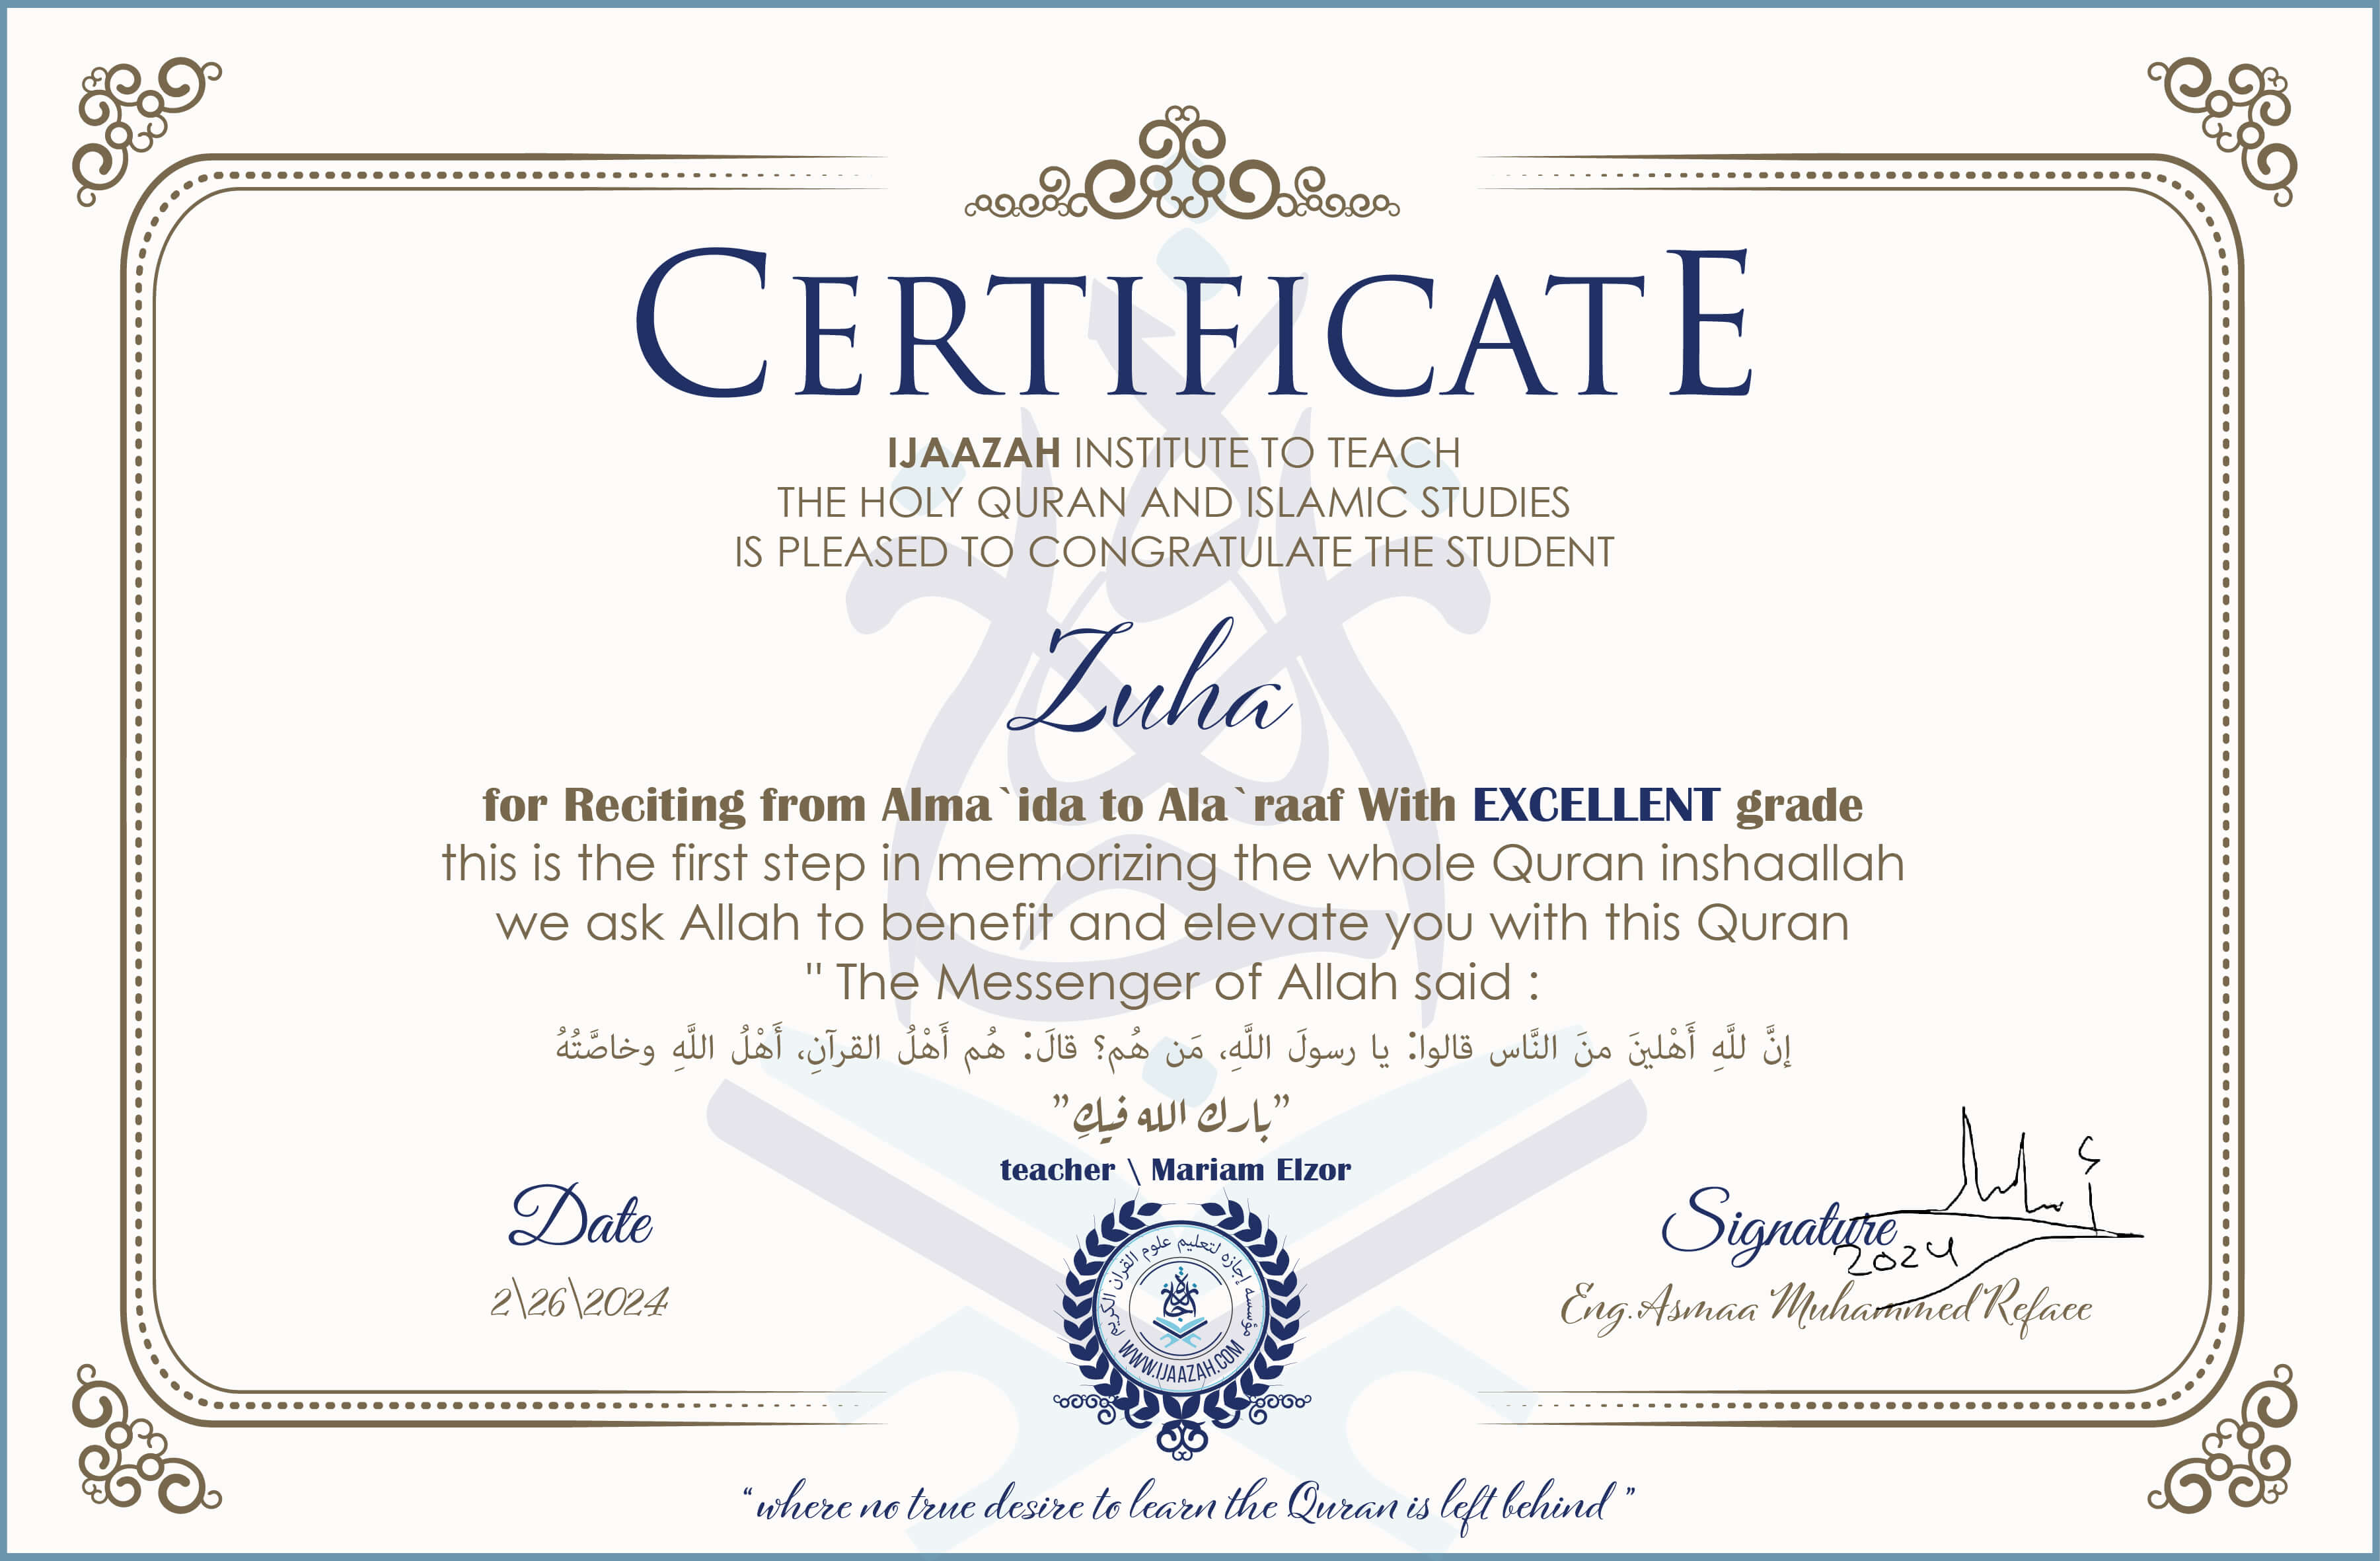 CERTIFICATE
IJAAZAH INSTITUTE TO TEACH THE HOLY QURAN AND ISLAMIC STUDIES IS PLEASED TO CONGRATULATE THE STUDENT Zuha for Reciting from Alma `ida to Ala `raaf With EXCELLENT grade
this is the first step in memorizing the whole Quran inshaallah we ask Allah to benefit and elevate you with this Quran The Messenger of Allah said :
إن لله أهلين من الناس» قالوا: يا رسول الله، من هم؟ قال: «هم أهل القرآن، أهل الله وخاصته
بارك الله فيك
With teacher\ Mariam Elzor